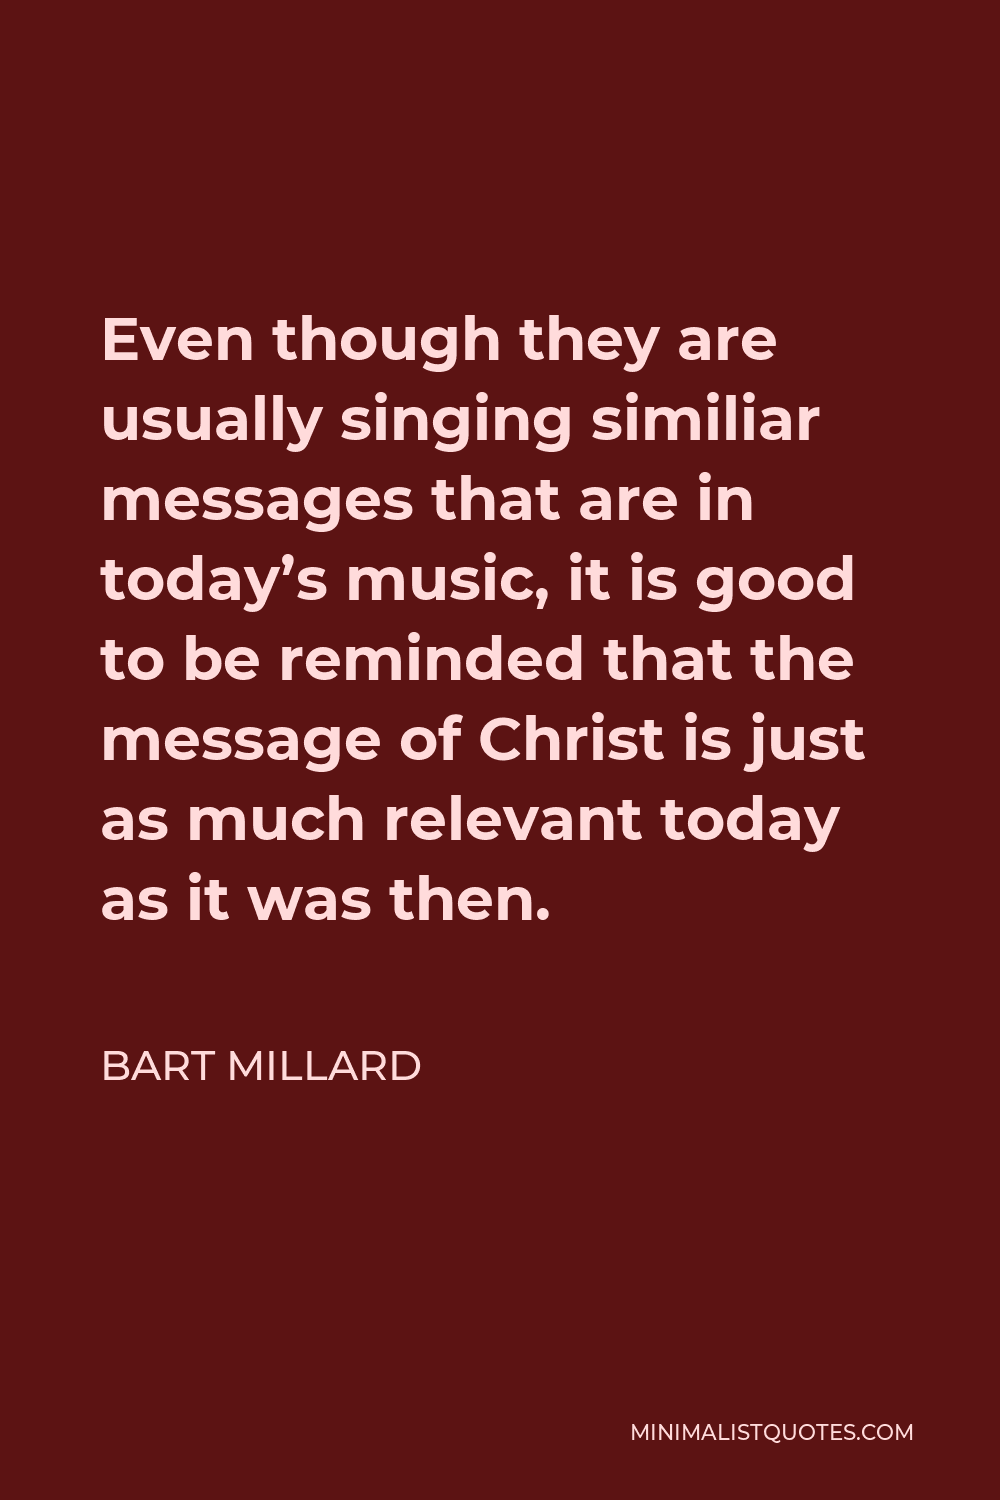 Bart Millard Quote - Even though they are usually singing similiar messages that are in today’s music, it is good to be reminded that the message of Christ is just as much relevant today as it was then.